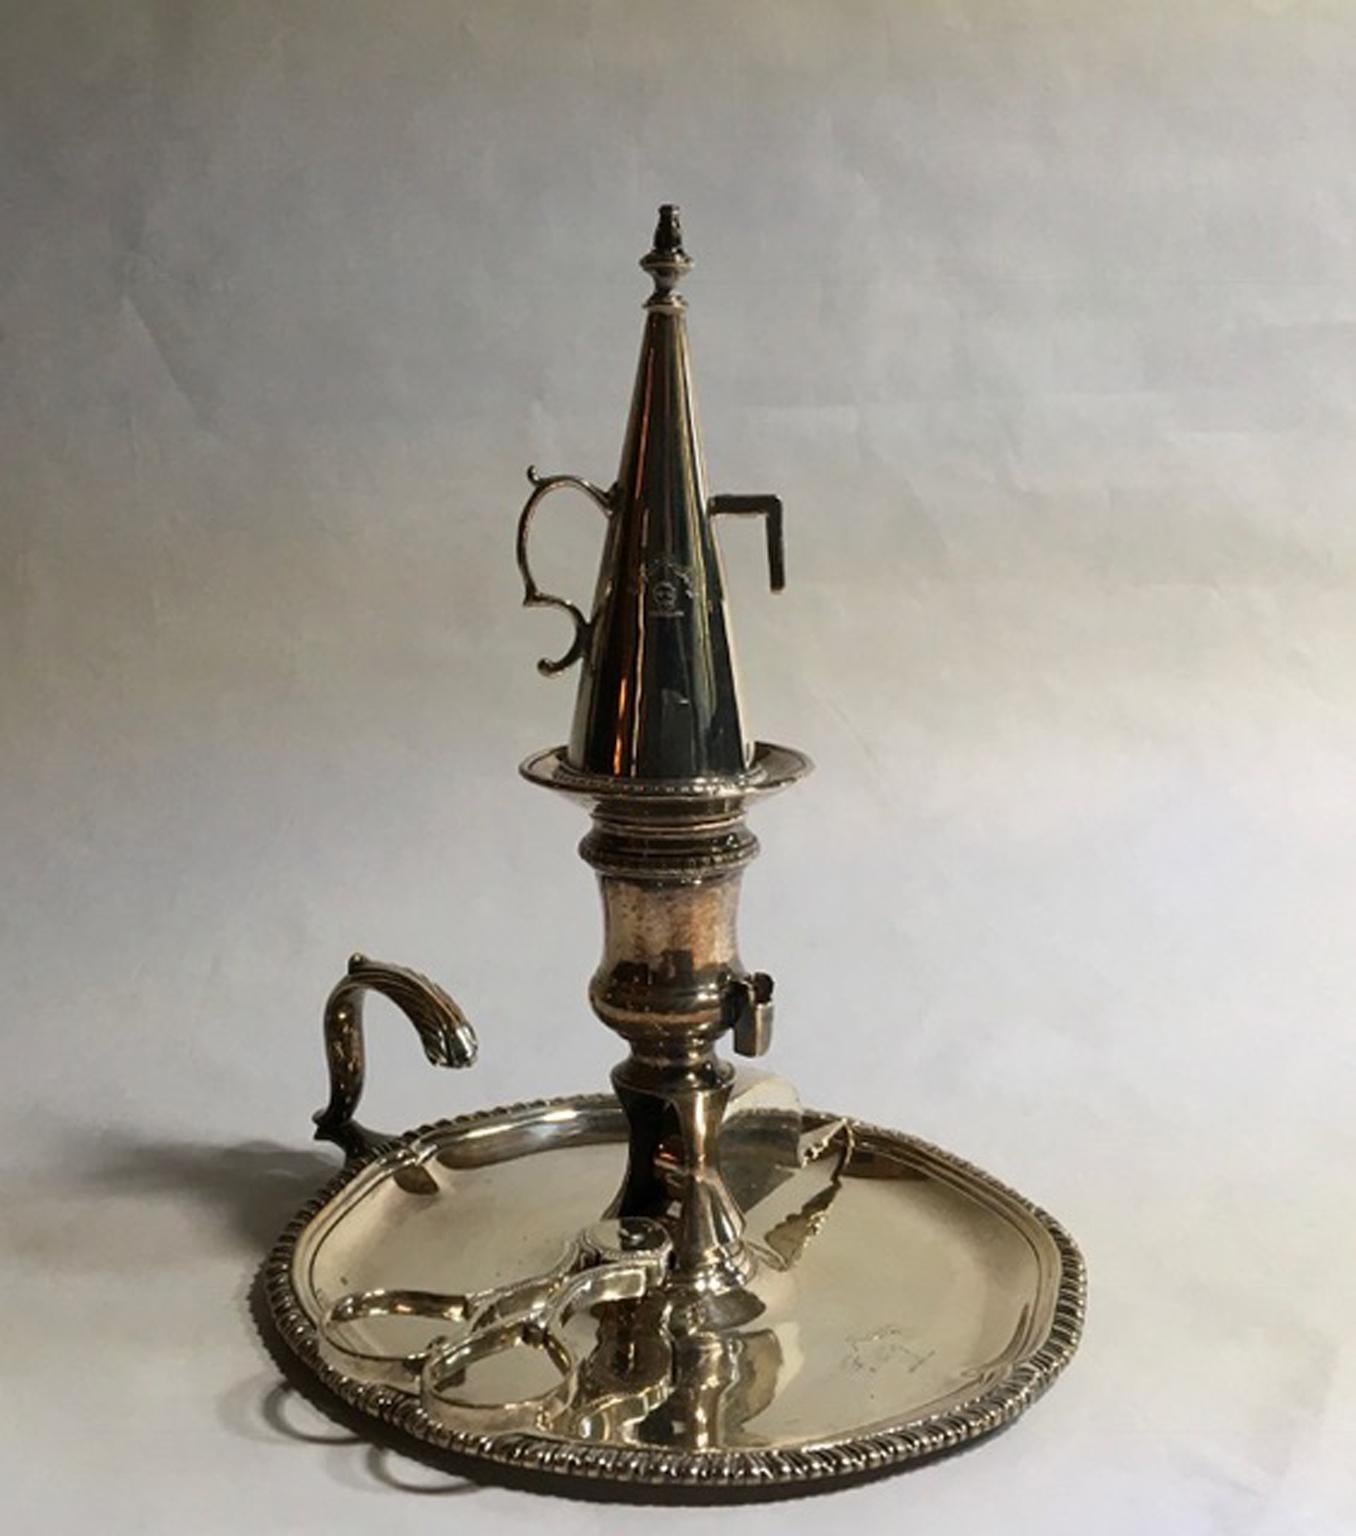 It is not easy to find a similar fully set, with original nozzle and snuffer. All the pieces are in sterling silver marked throughout.
Marked also with the words 